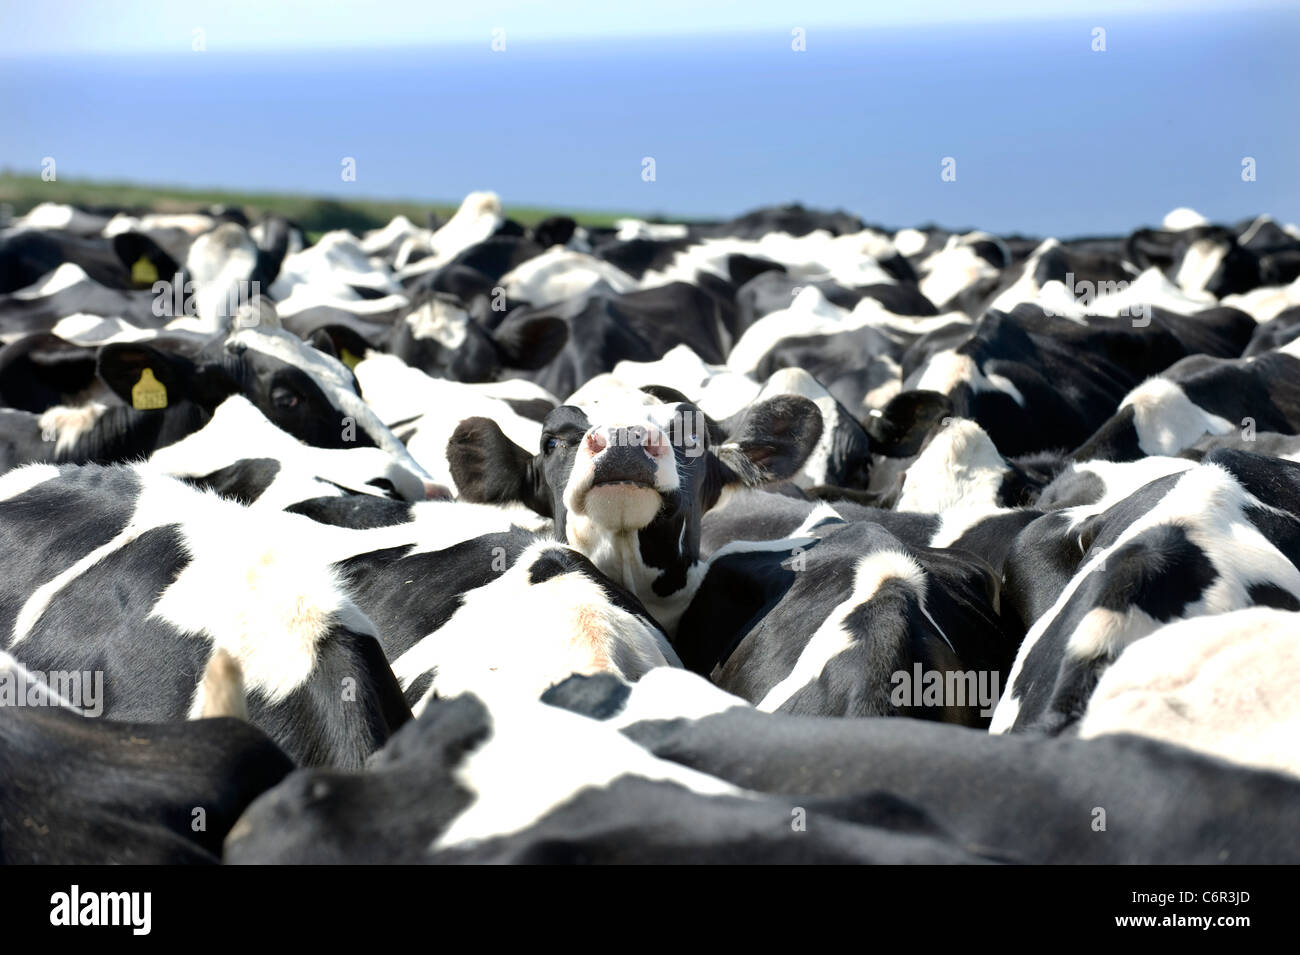 A Black and White Friesian cow looks out from a tightly packed herd of milking cattle. Stock Photo